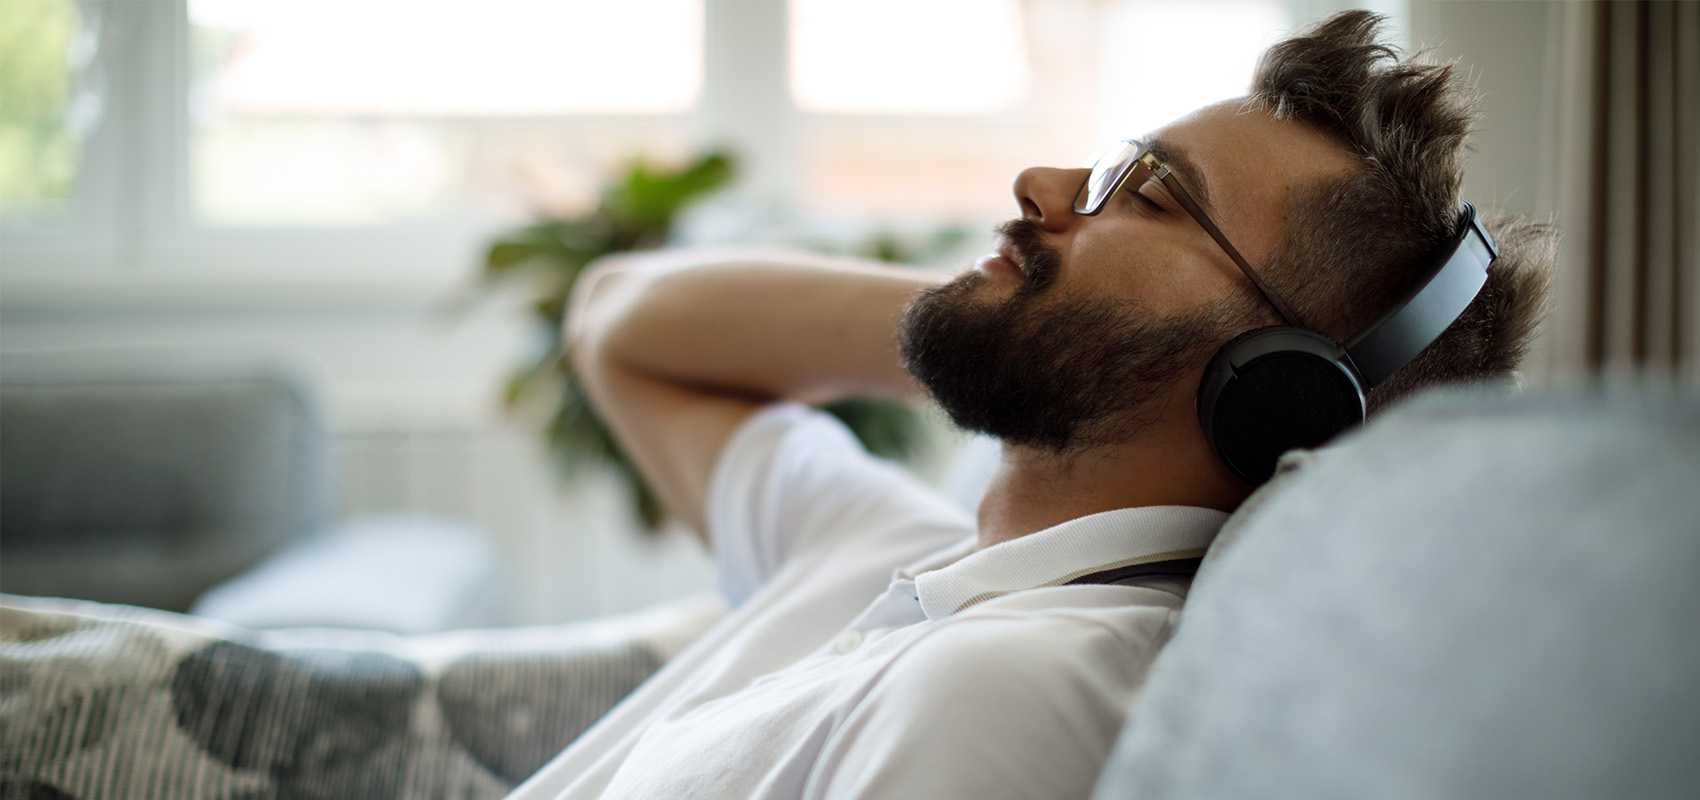 man wearing headphones relaxed on sofa